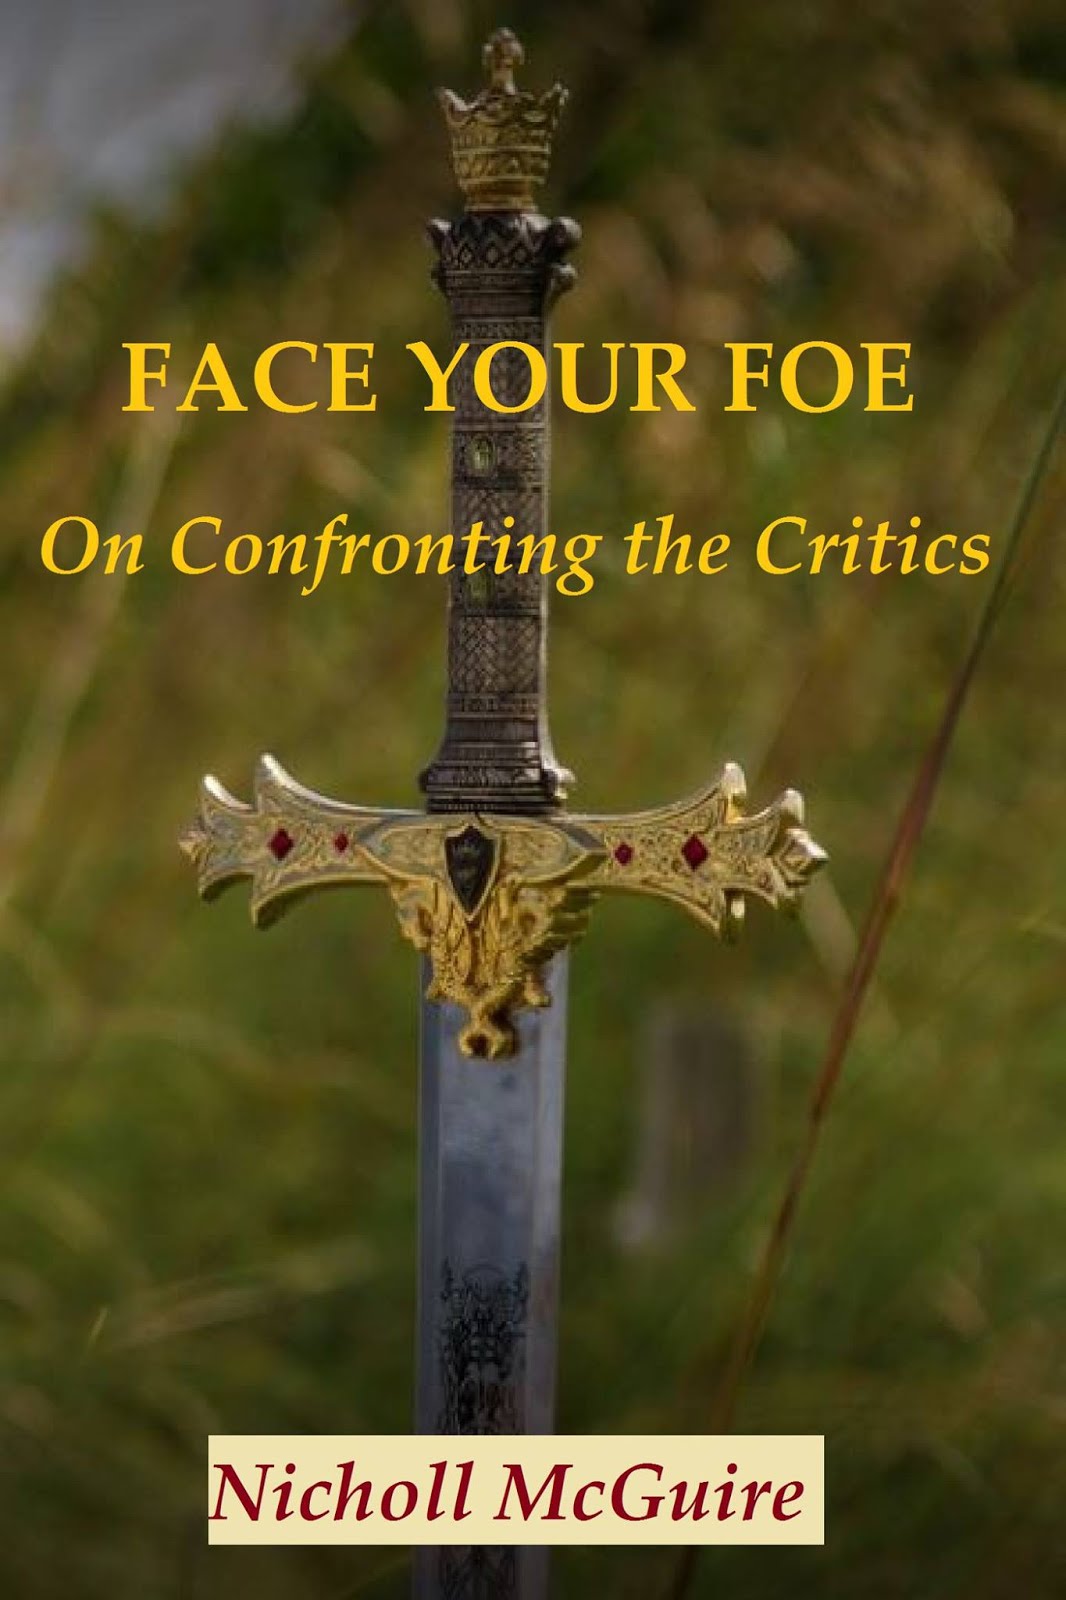 Face Your Foe - The Book